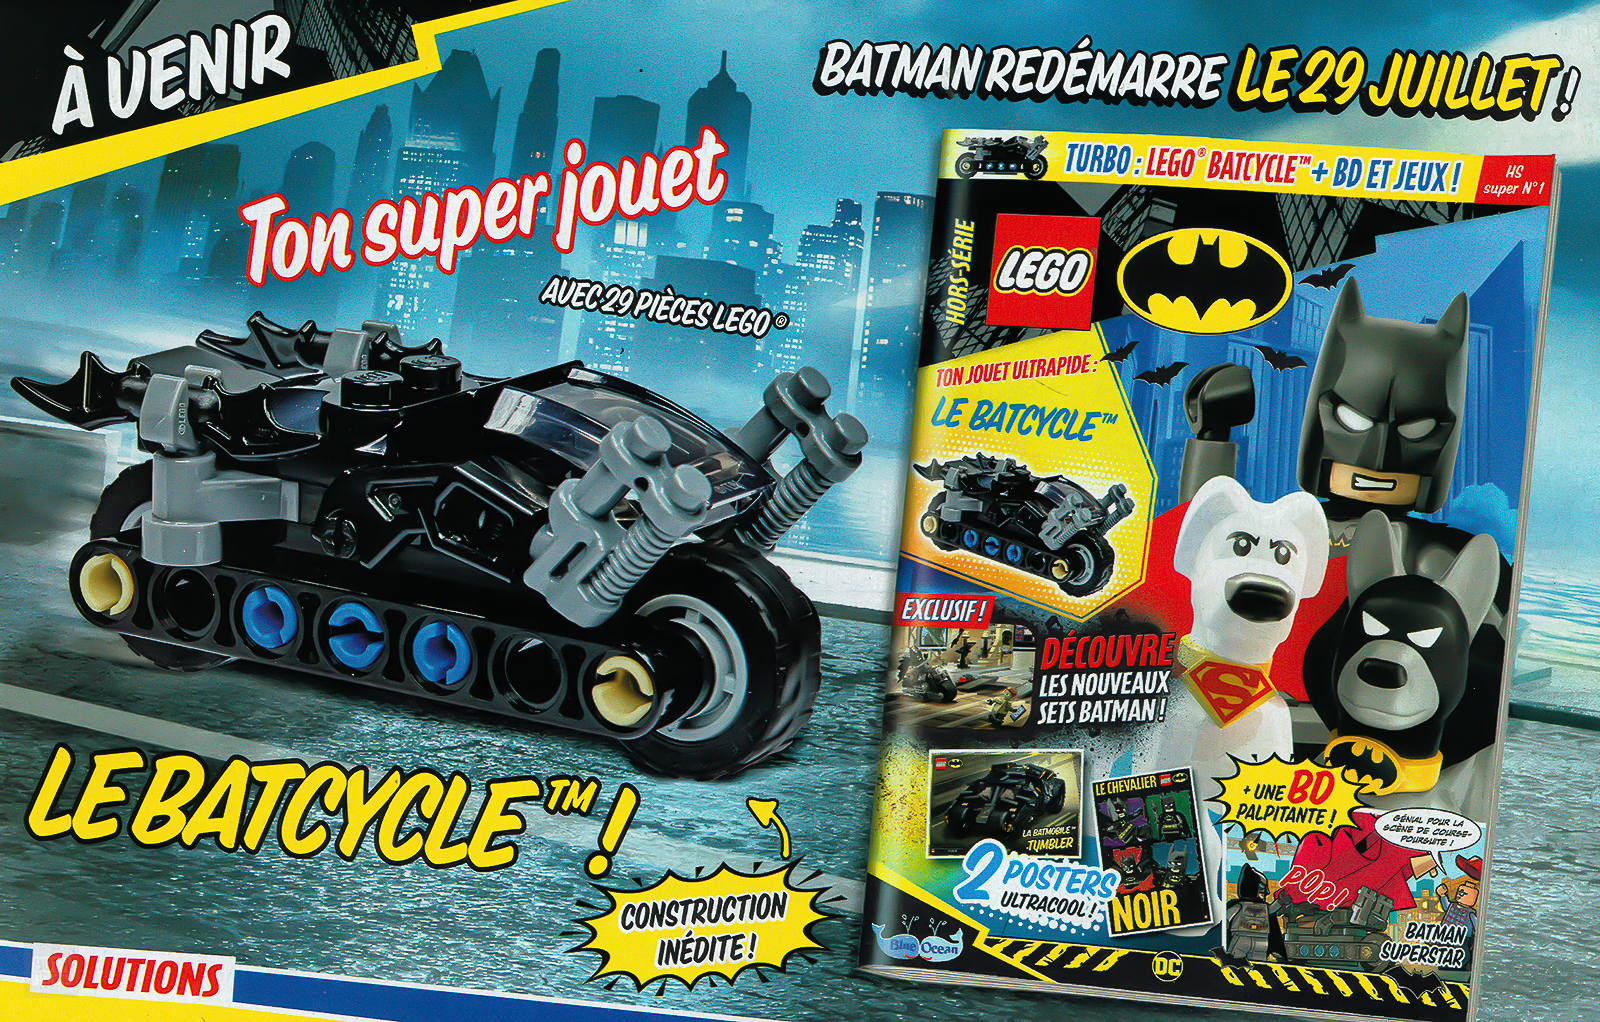 On newsstands: The June 2022 issue of the official LEGO Batman magazine